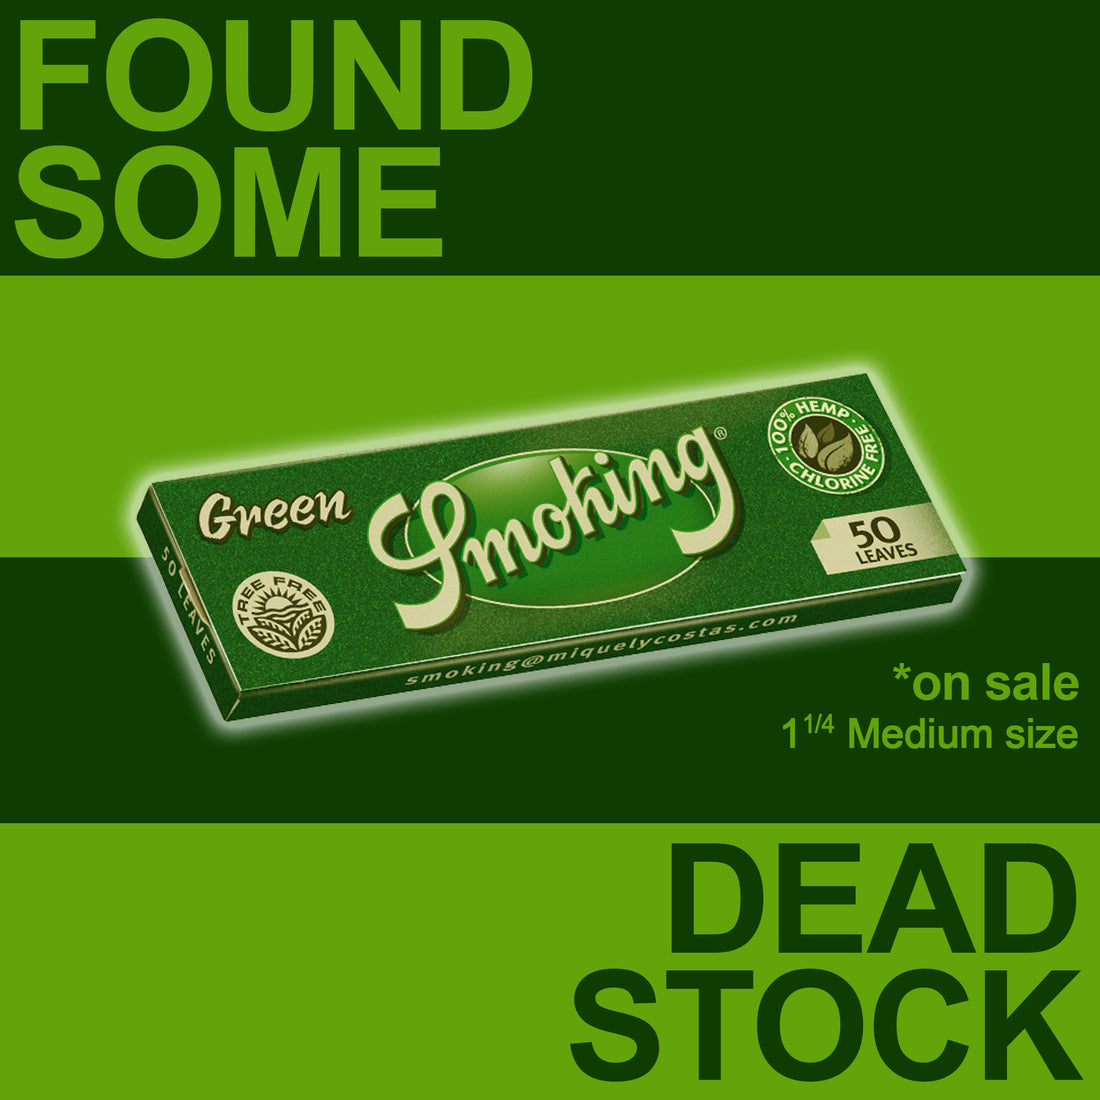 We Found Some Amazing Smoking® Green Dead Stock...